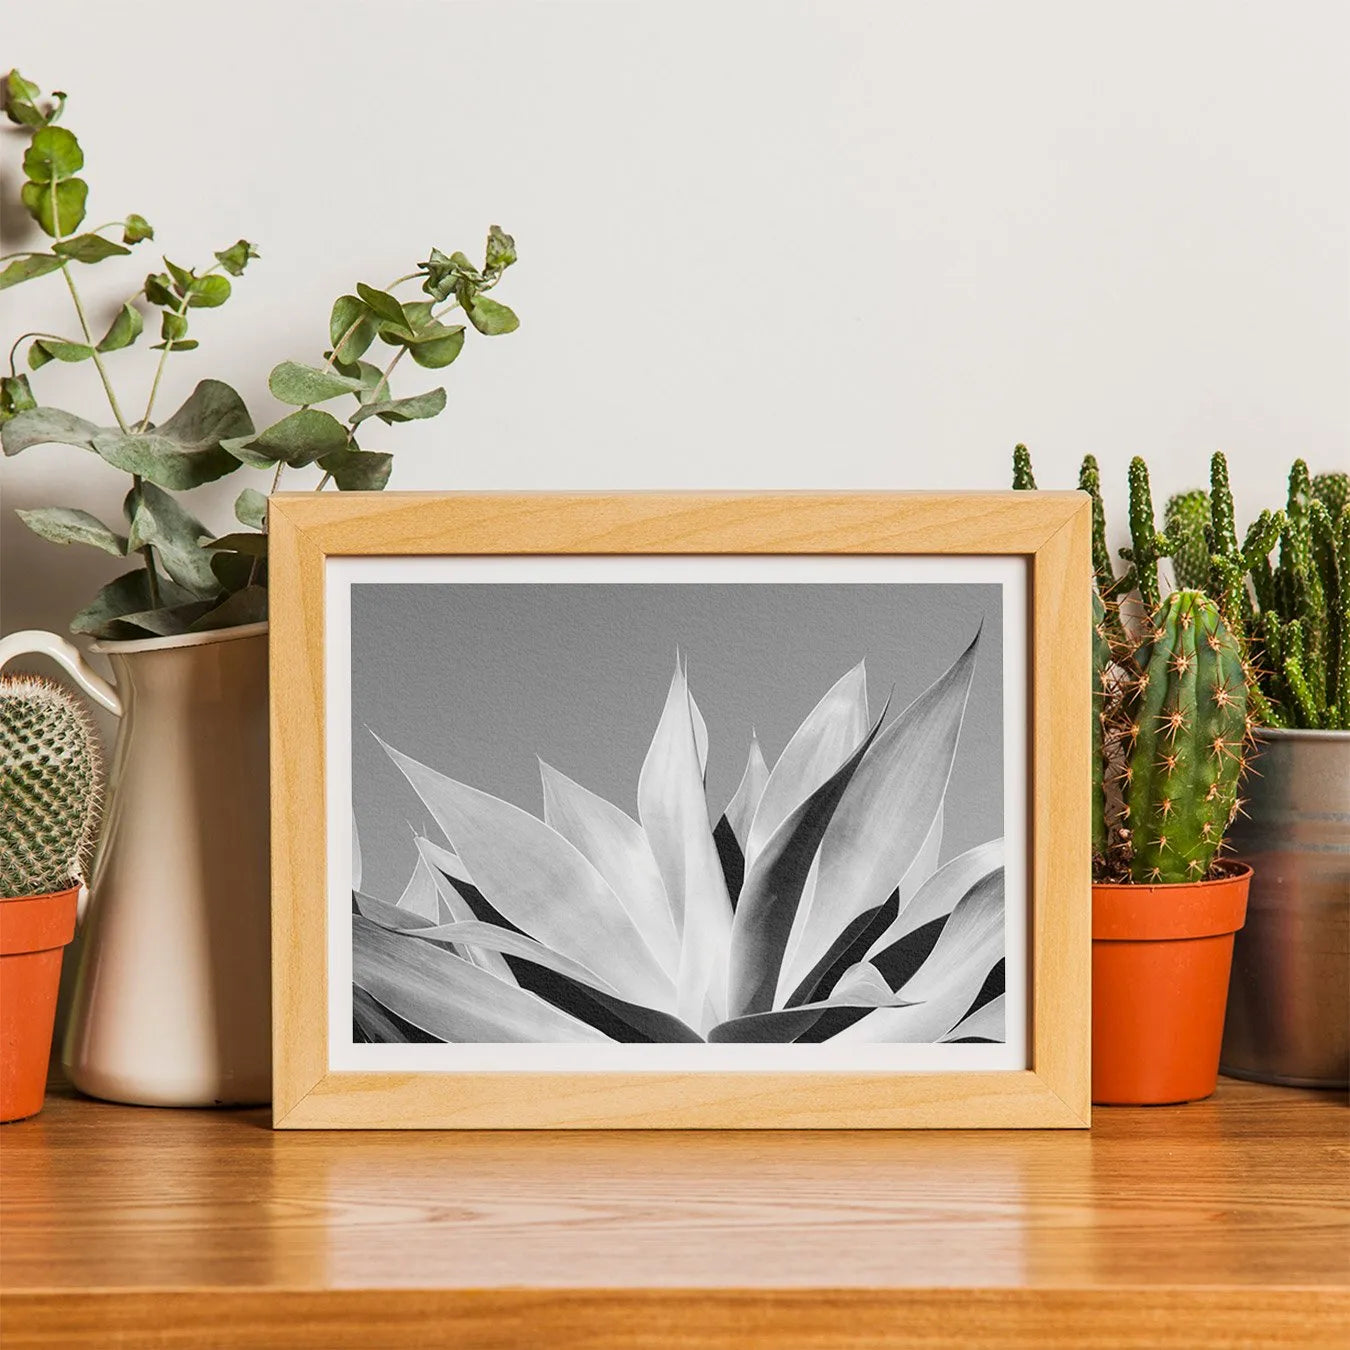 In Bloom - Succulent Black And White Photography Art Print - 8×10 - Posters Prints & Visual Artwork - Aesthetic Art